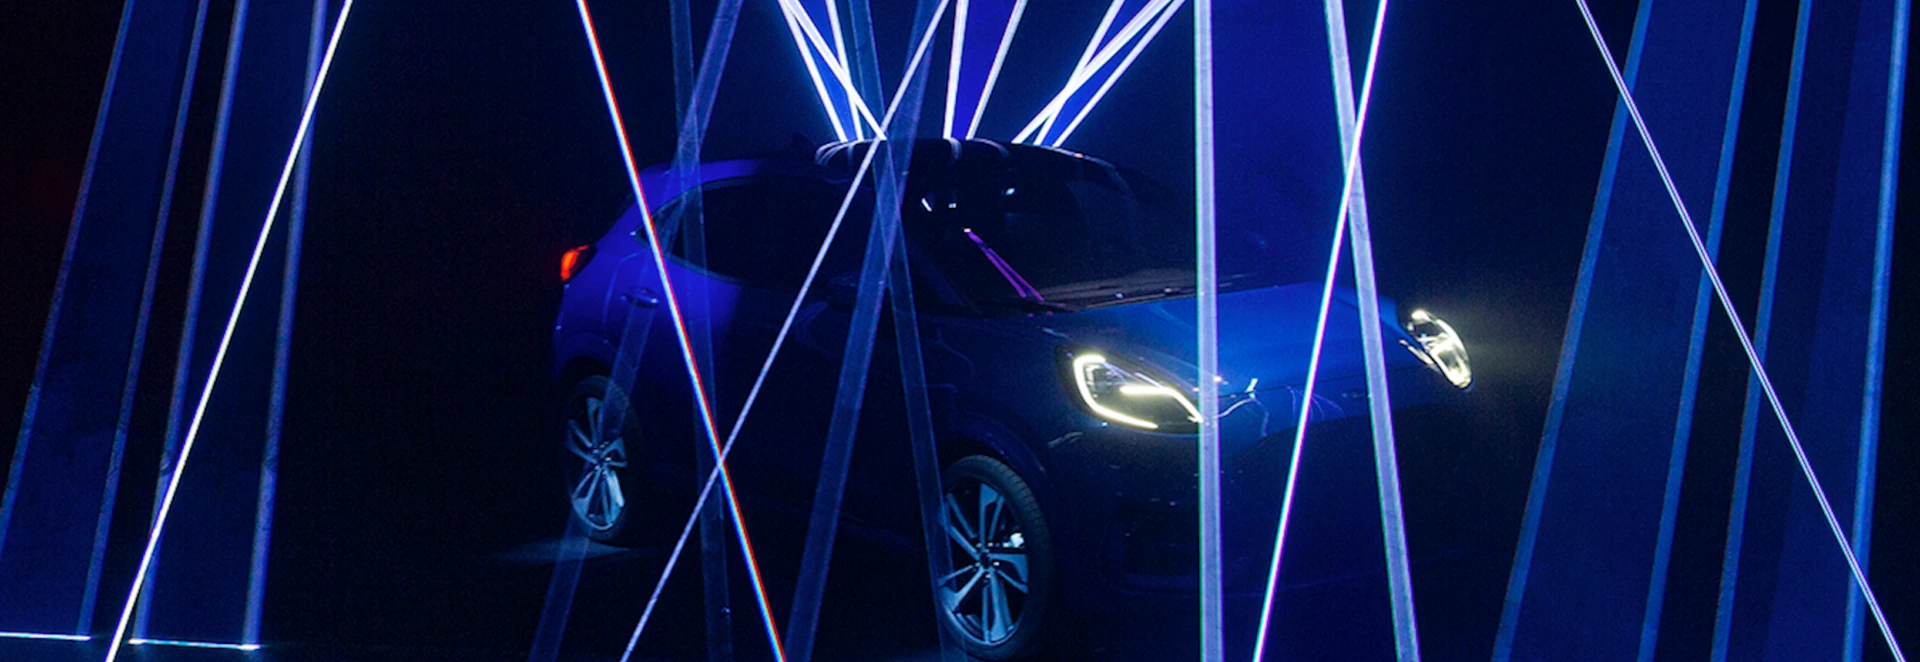 Ford gives first glimpse at new Puma